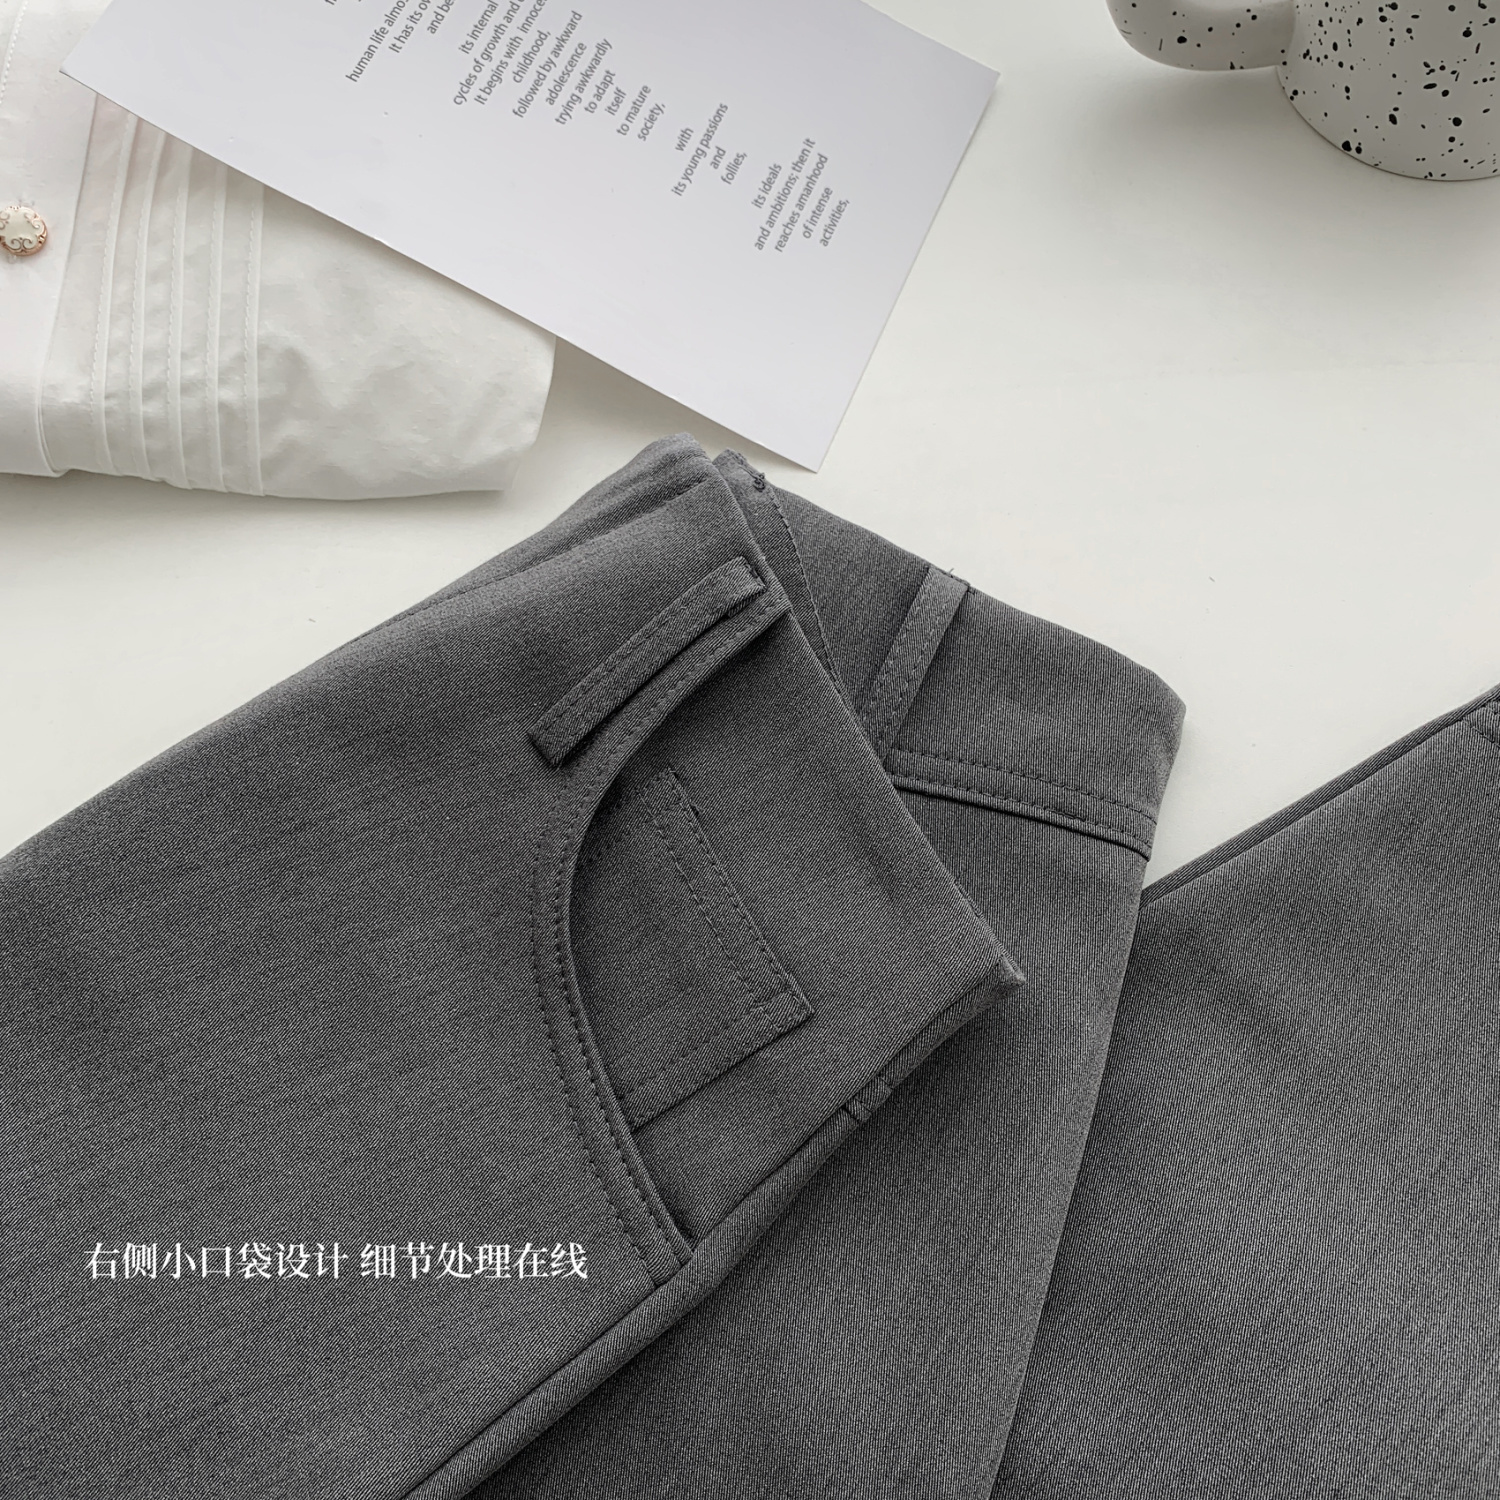 Grey suit A-line half length skirt  summer new high waisted anti glare skirt with versatile crotch blocking and slimming short skirt